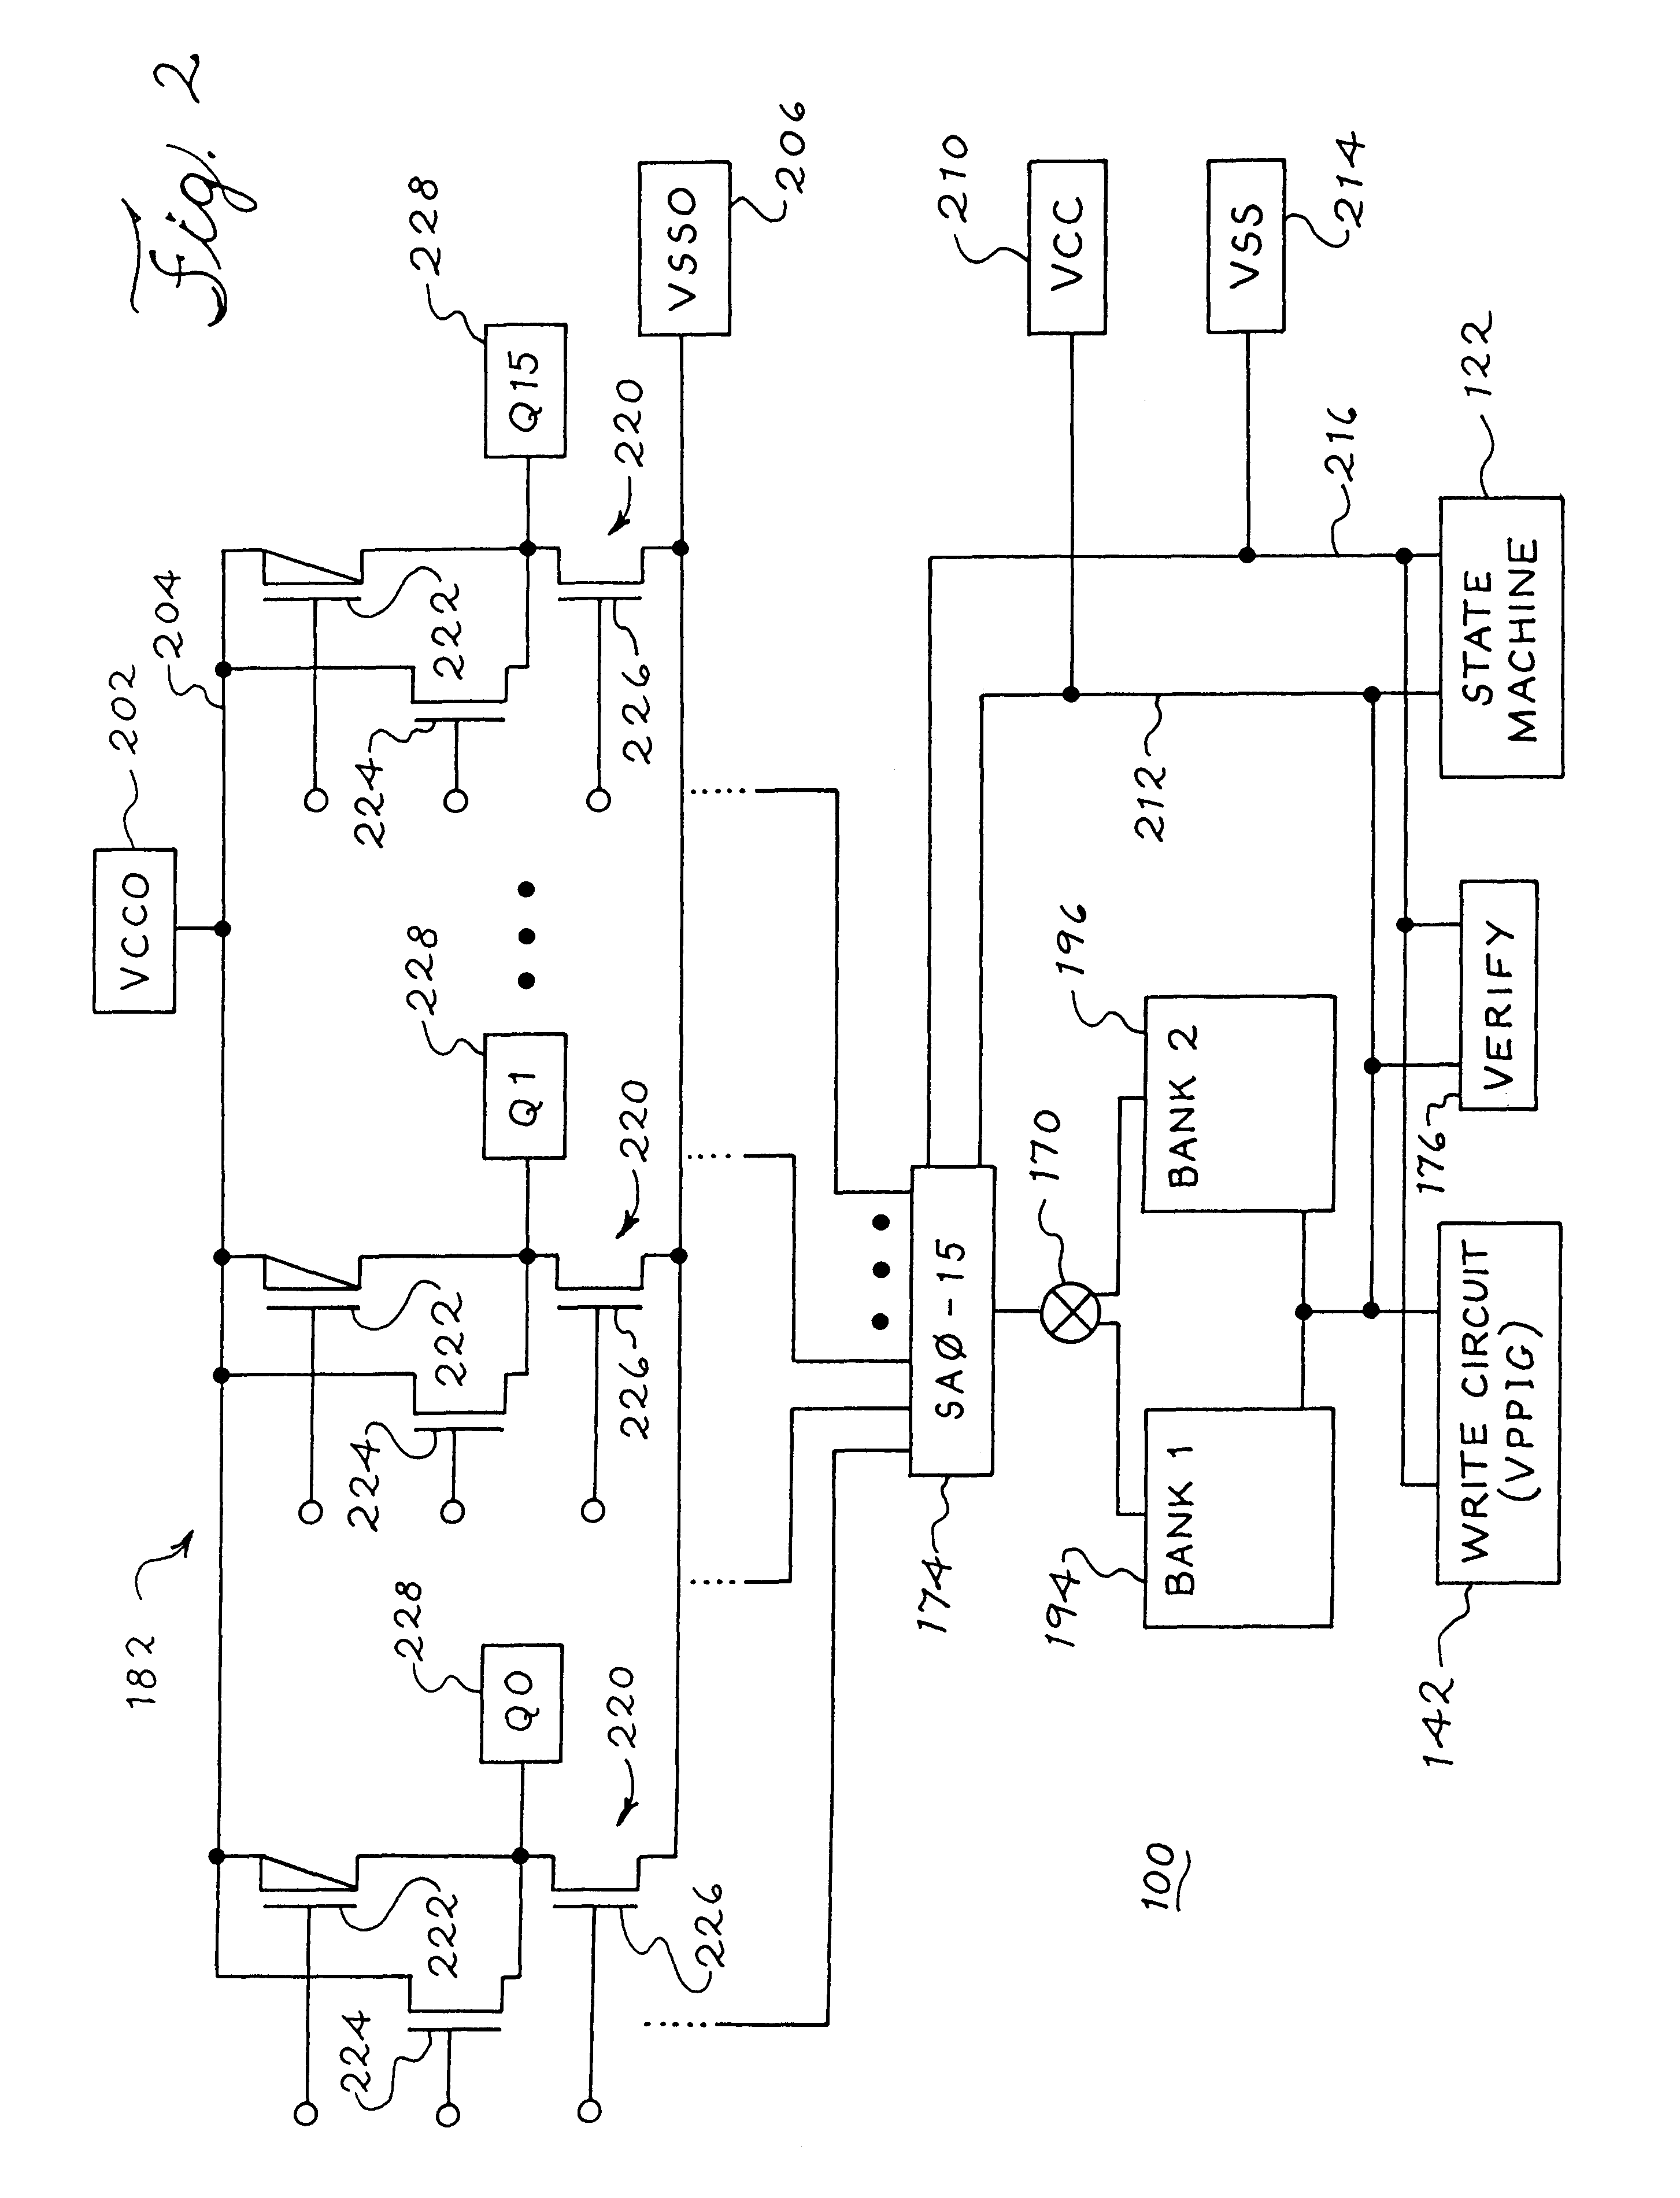 Separate output power supply to reduce output noise for a simultaneous operation